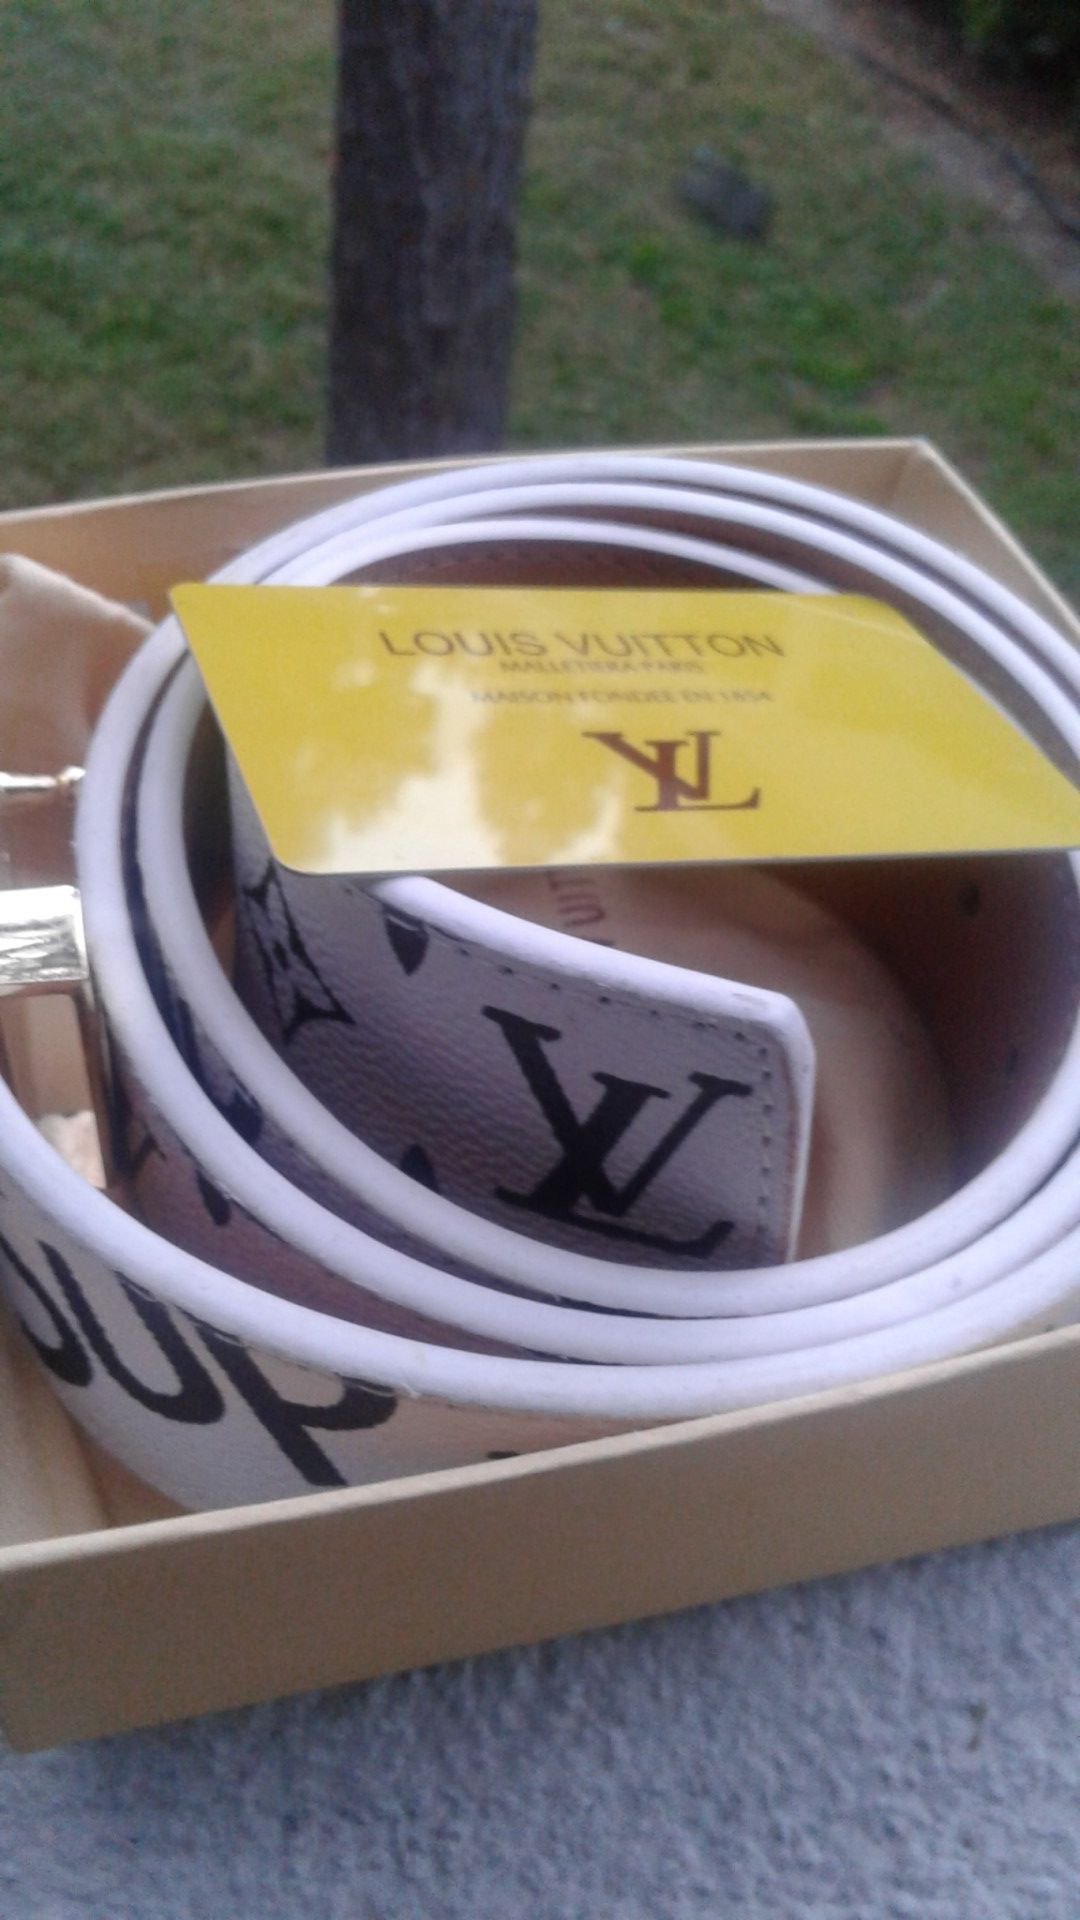 LV & Supreme deal: Supreme headband ft Louis Vuitton/Supreme Belt for Sale  in Federal Way, WA - OfferUp